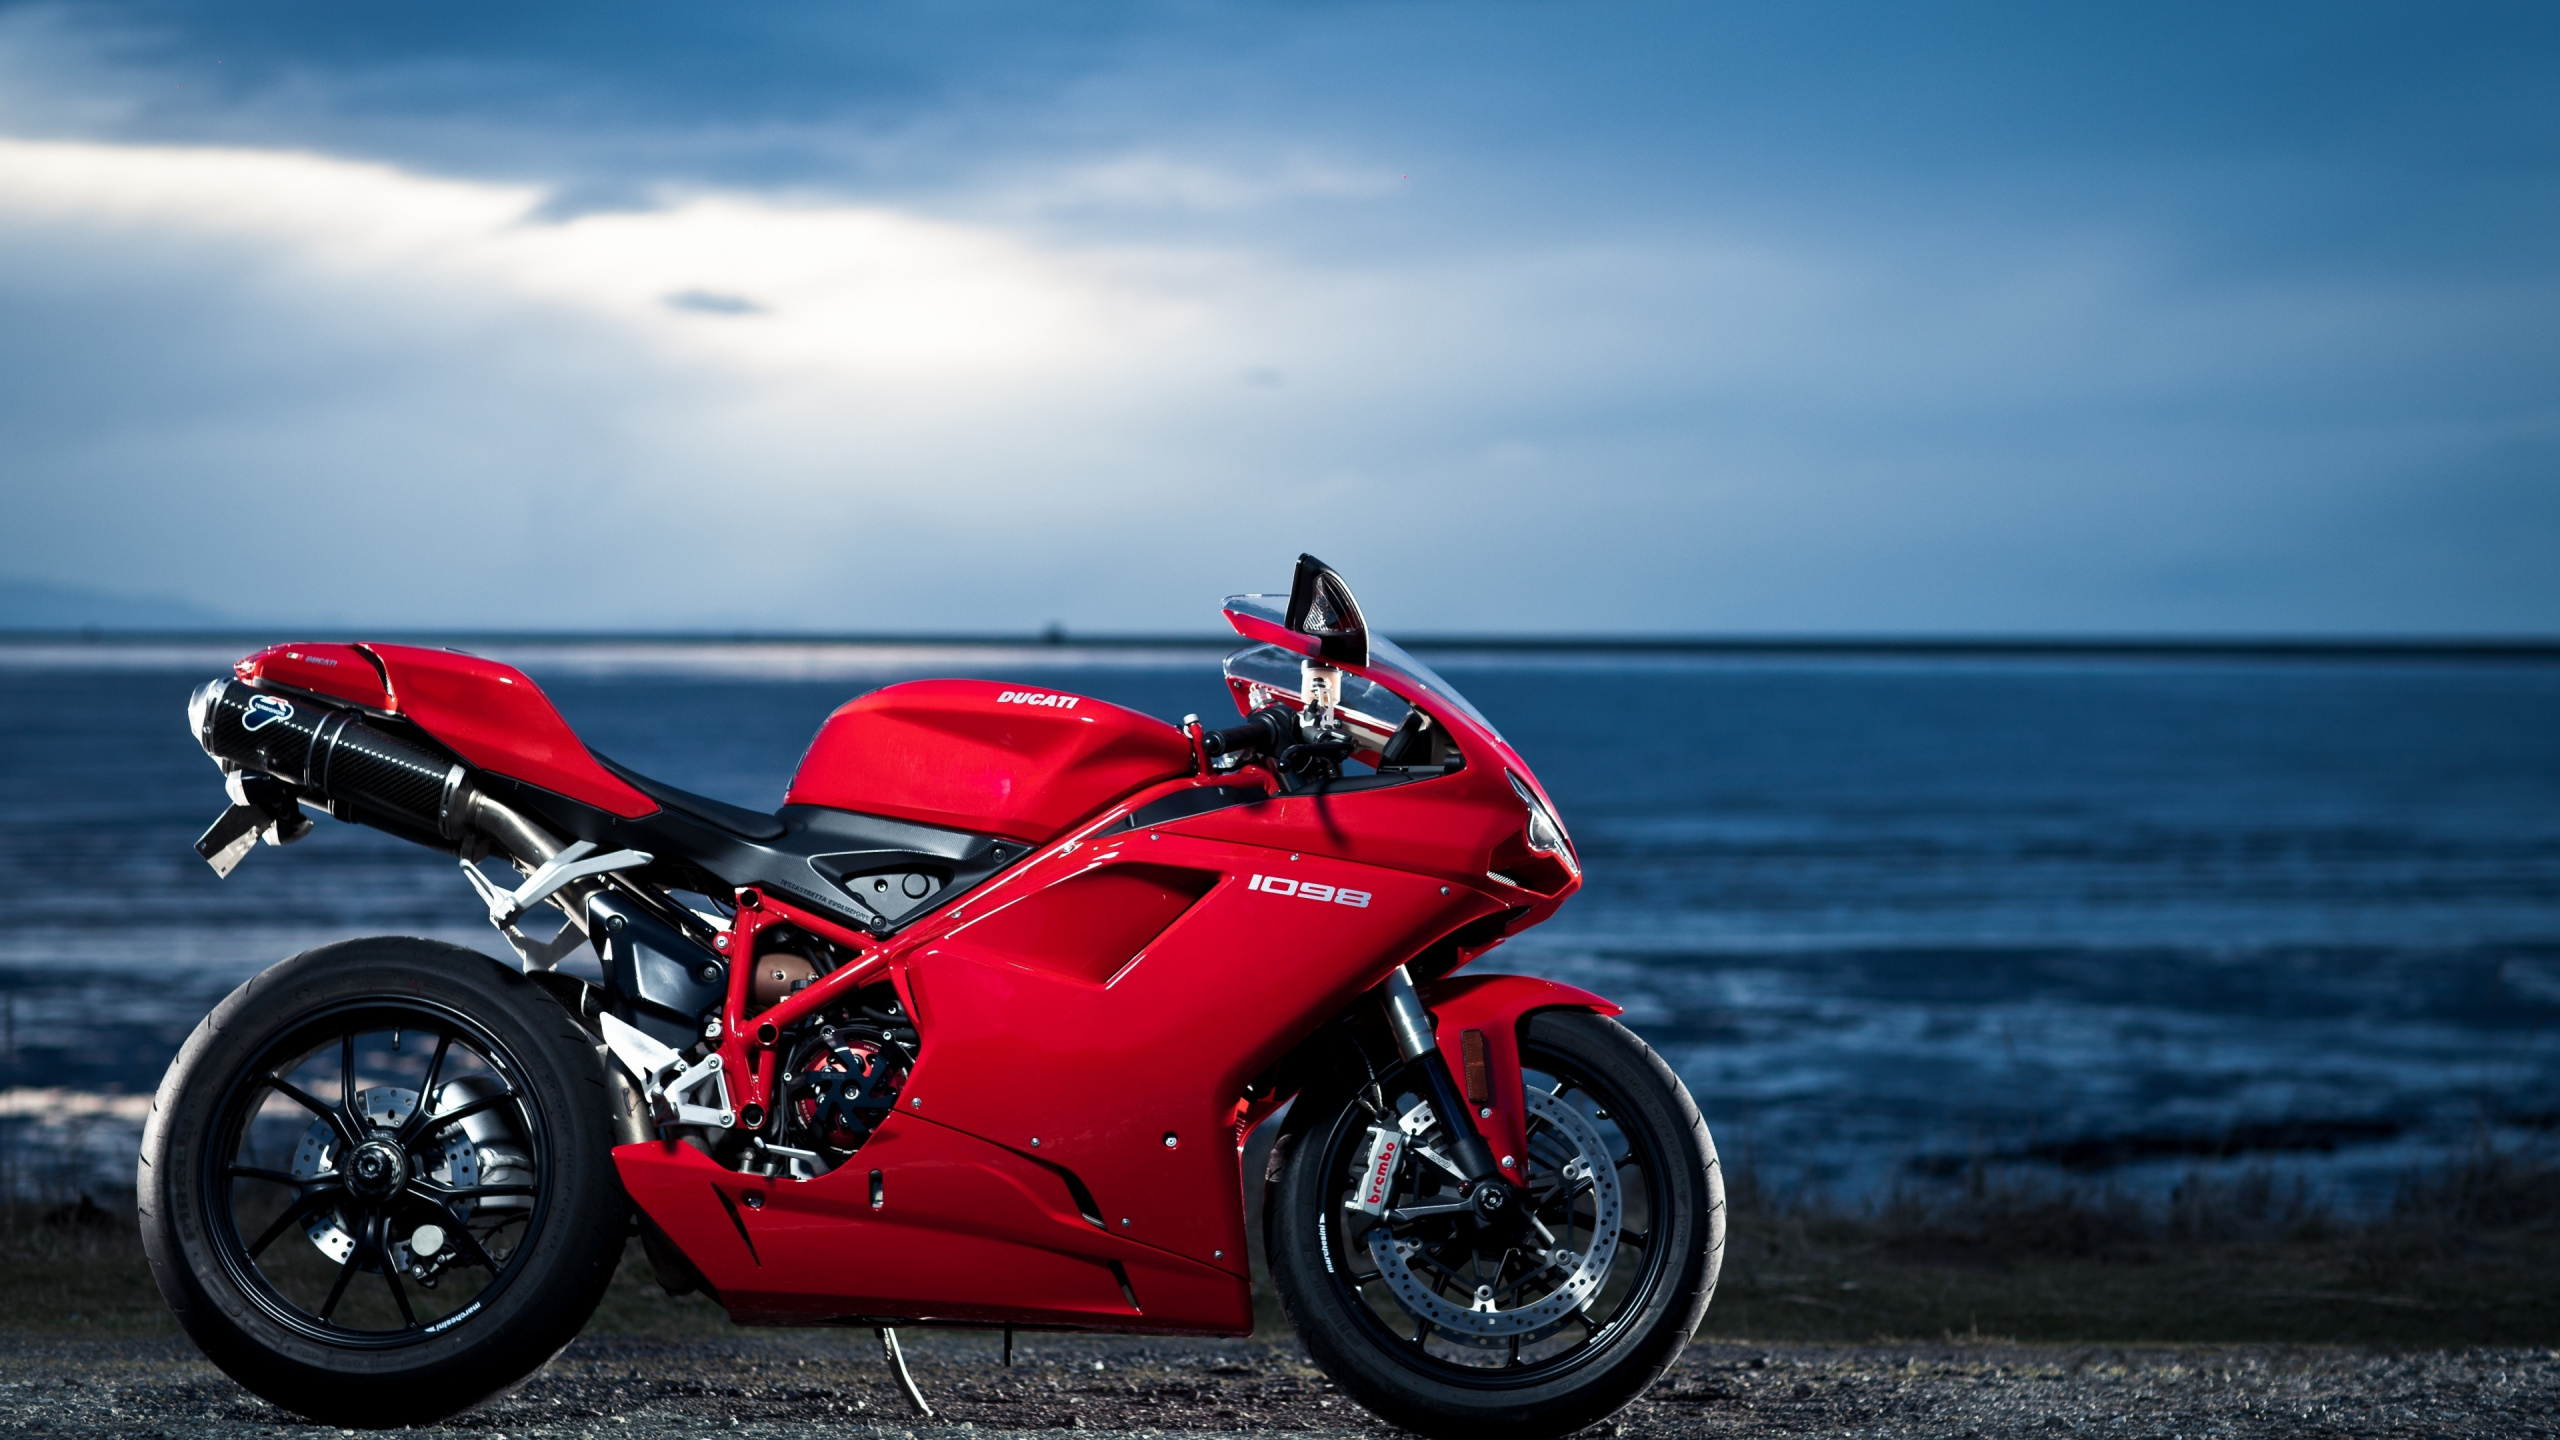 Red and Black Sports Bike Parked on Seashore During Daytime. Wallpaper in 2560x1440 Resolution